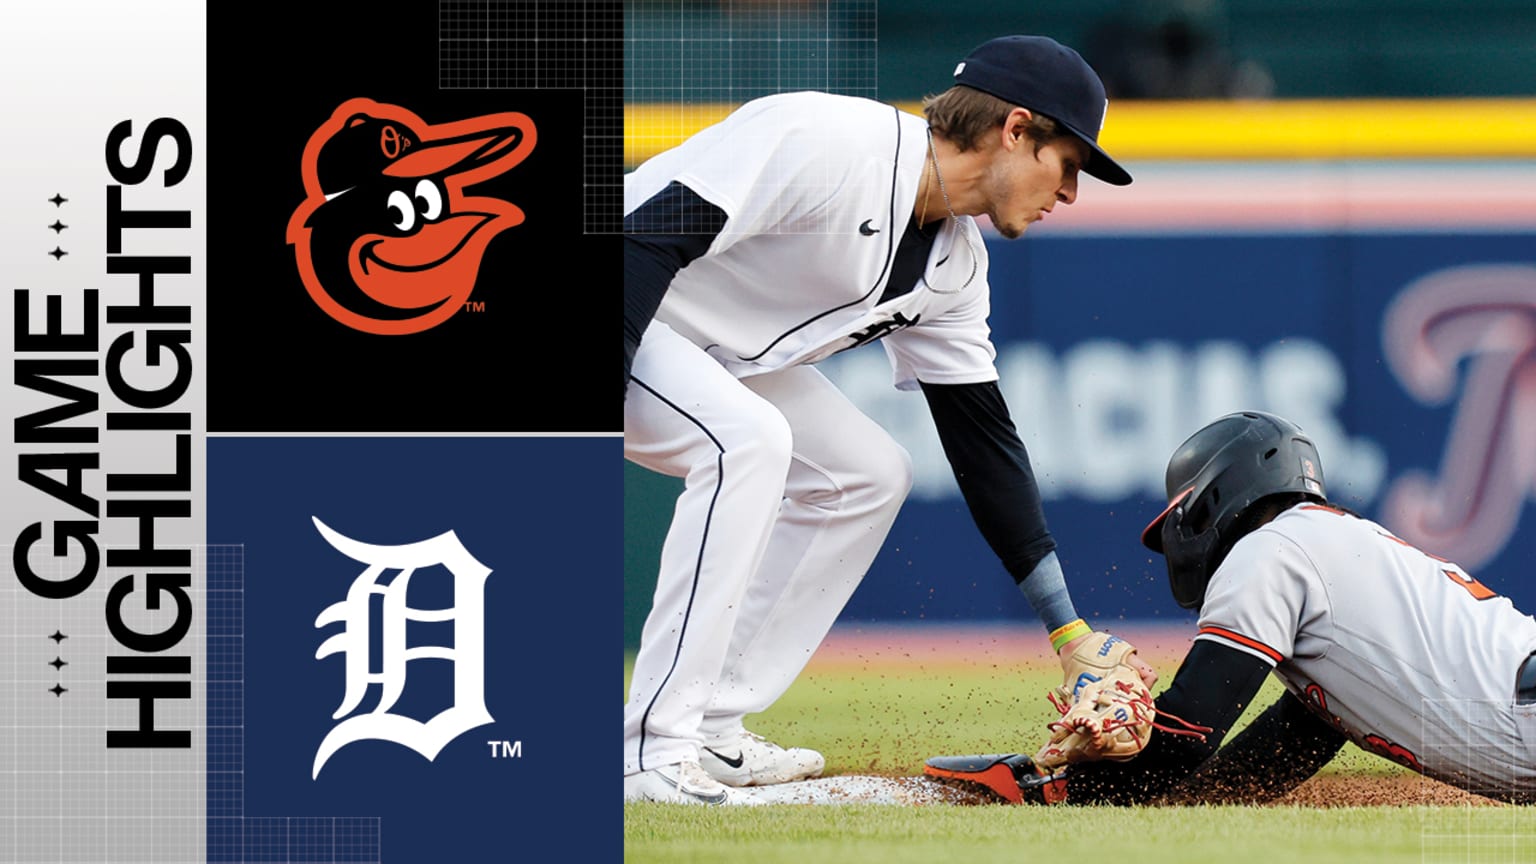 Detroit Tigers 2019 Spring Training Gift Guide